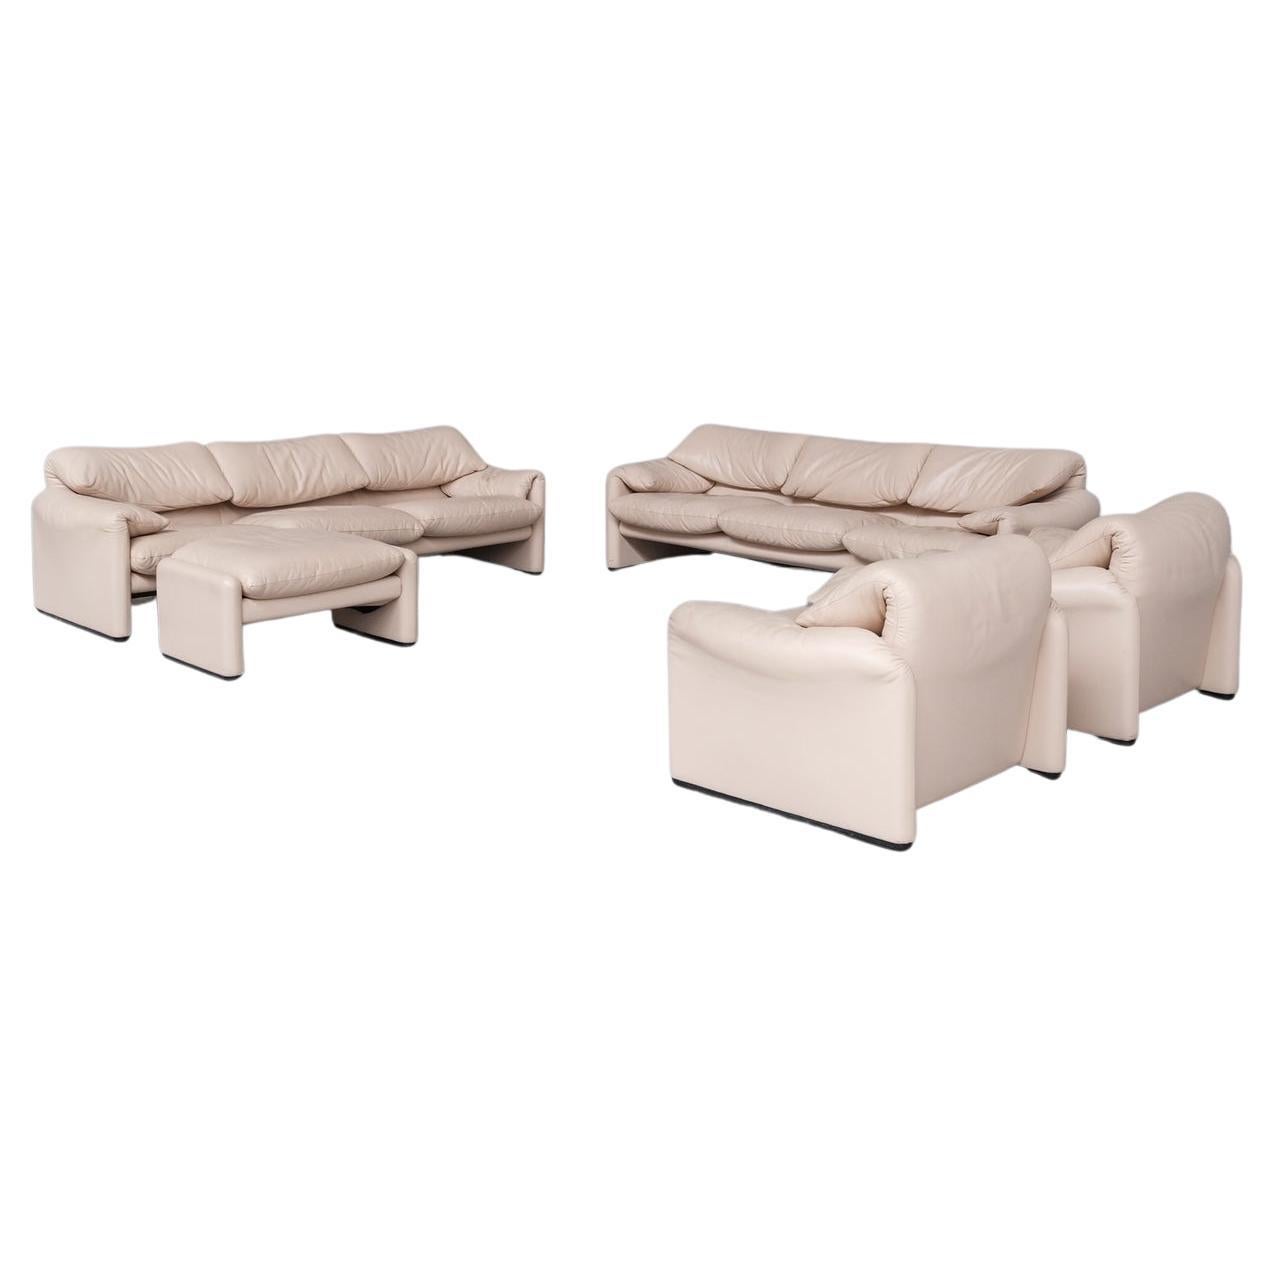 Vico Magisretti 'Maralunga' Suite of Sofas and Armchairs for Cassina For Sale